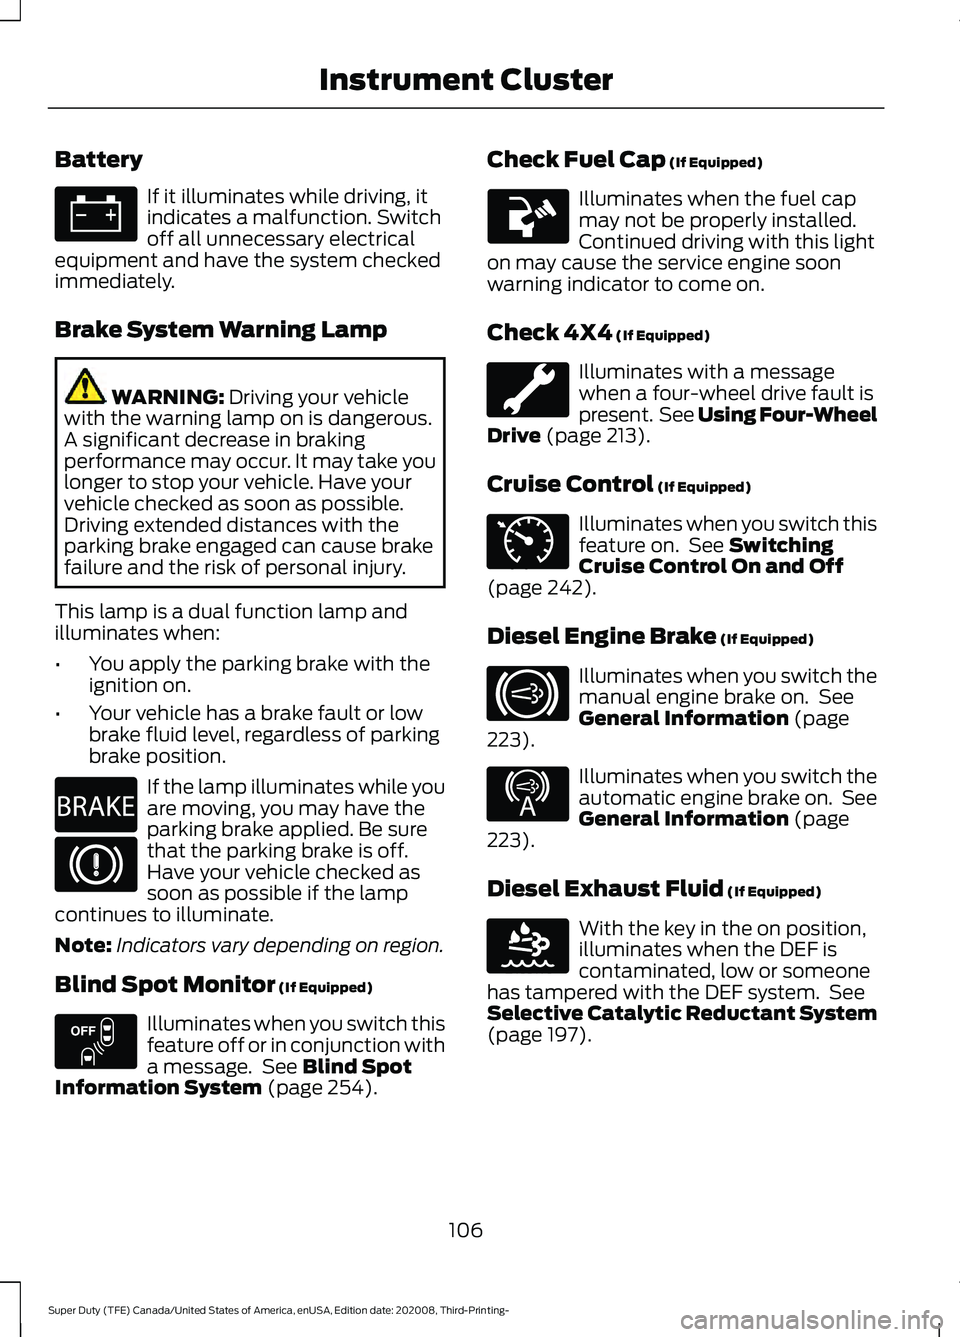 FORD F-350 2021  Owners Manual Battery
If it illuminates while driving, it
indicates a malfunction. Switch
off all unnecessary electrical
equipment and have the system checked
immediately.
Brake System Warning Lamp WARNING: Driving